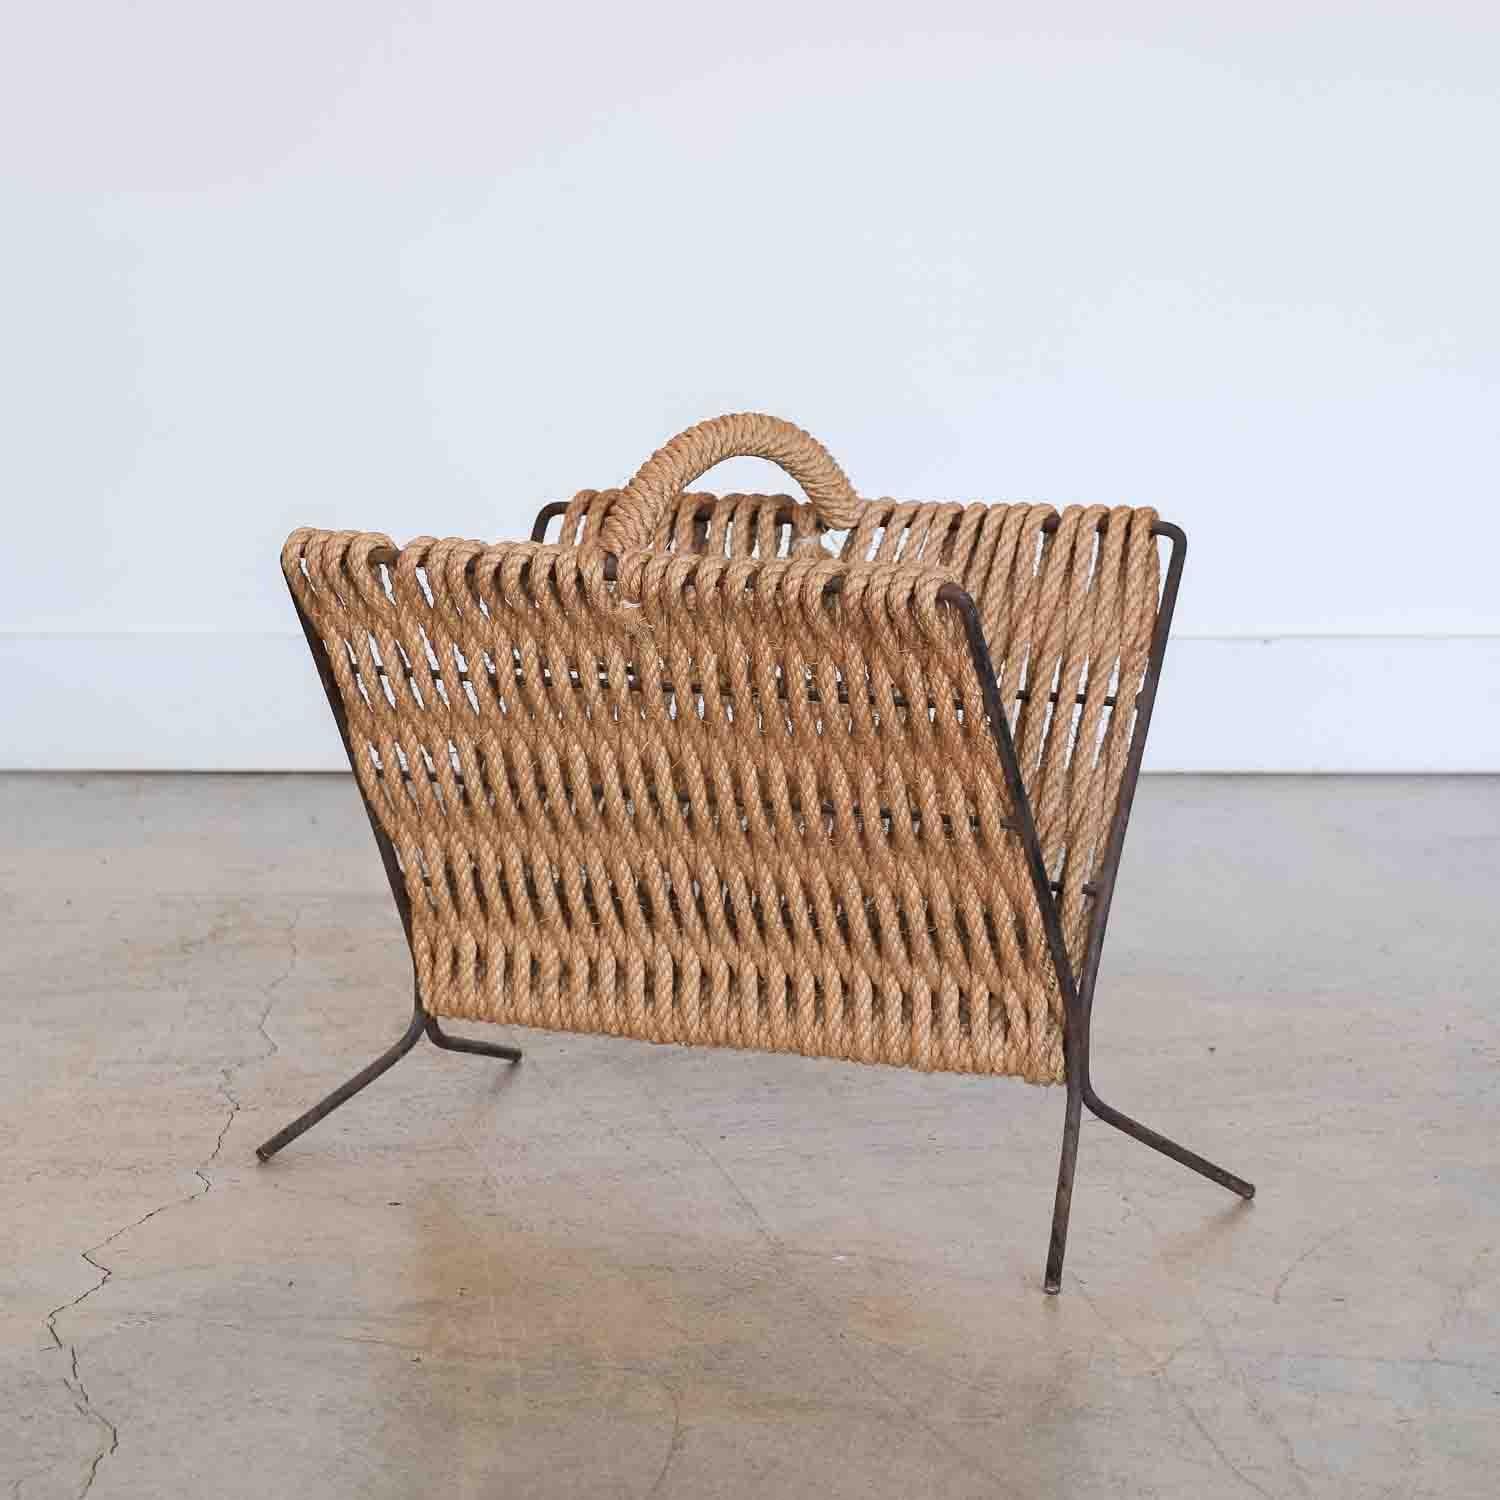 Beautiful rope and iron magazine rack from France, 1950's. Original woven rope shows nice age and patina on iron. Unique storage piece. 